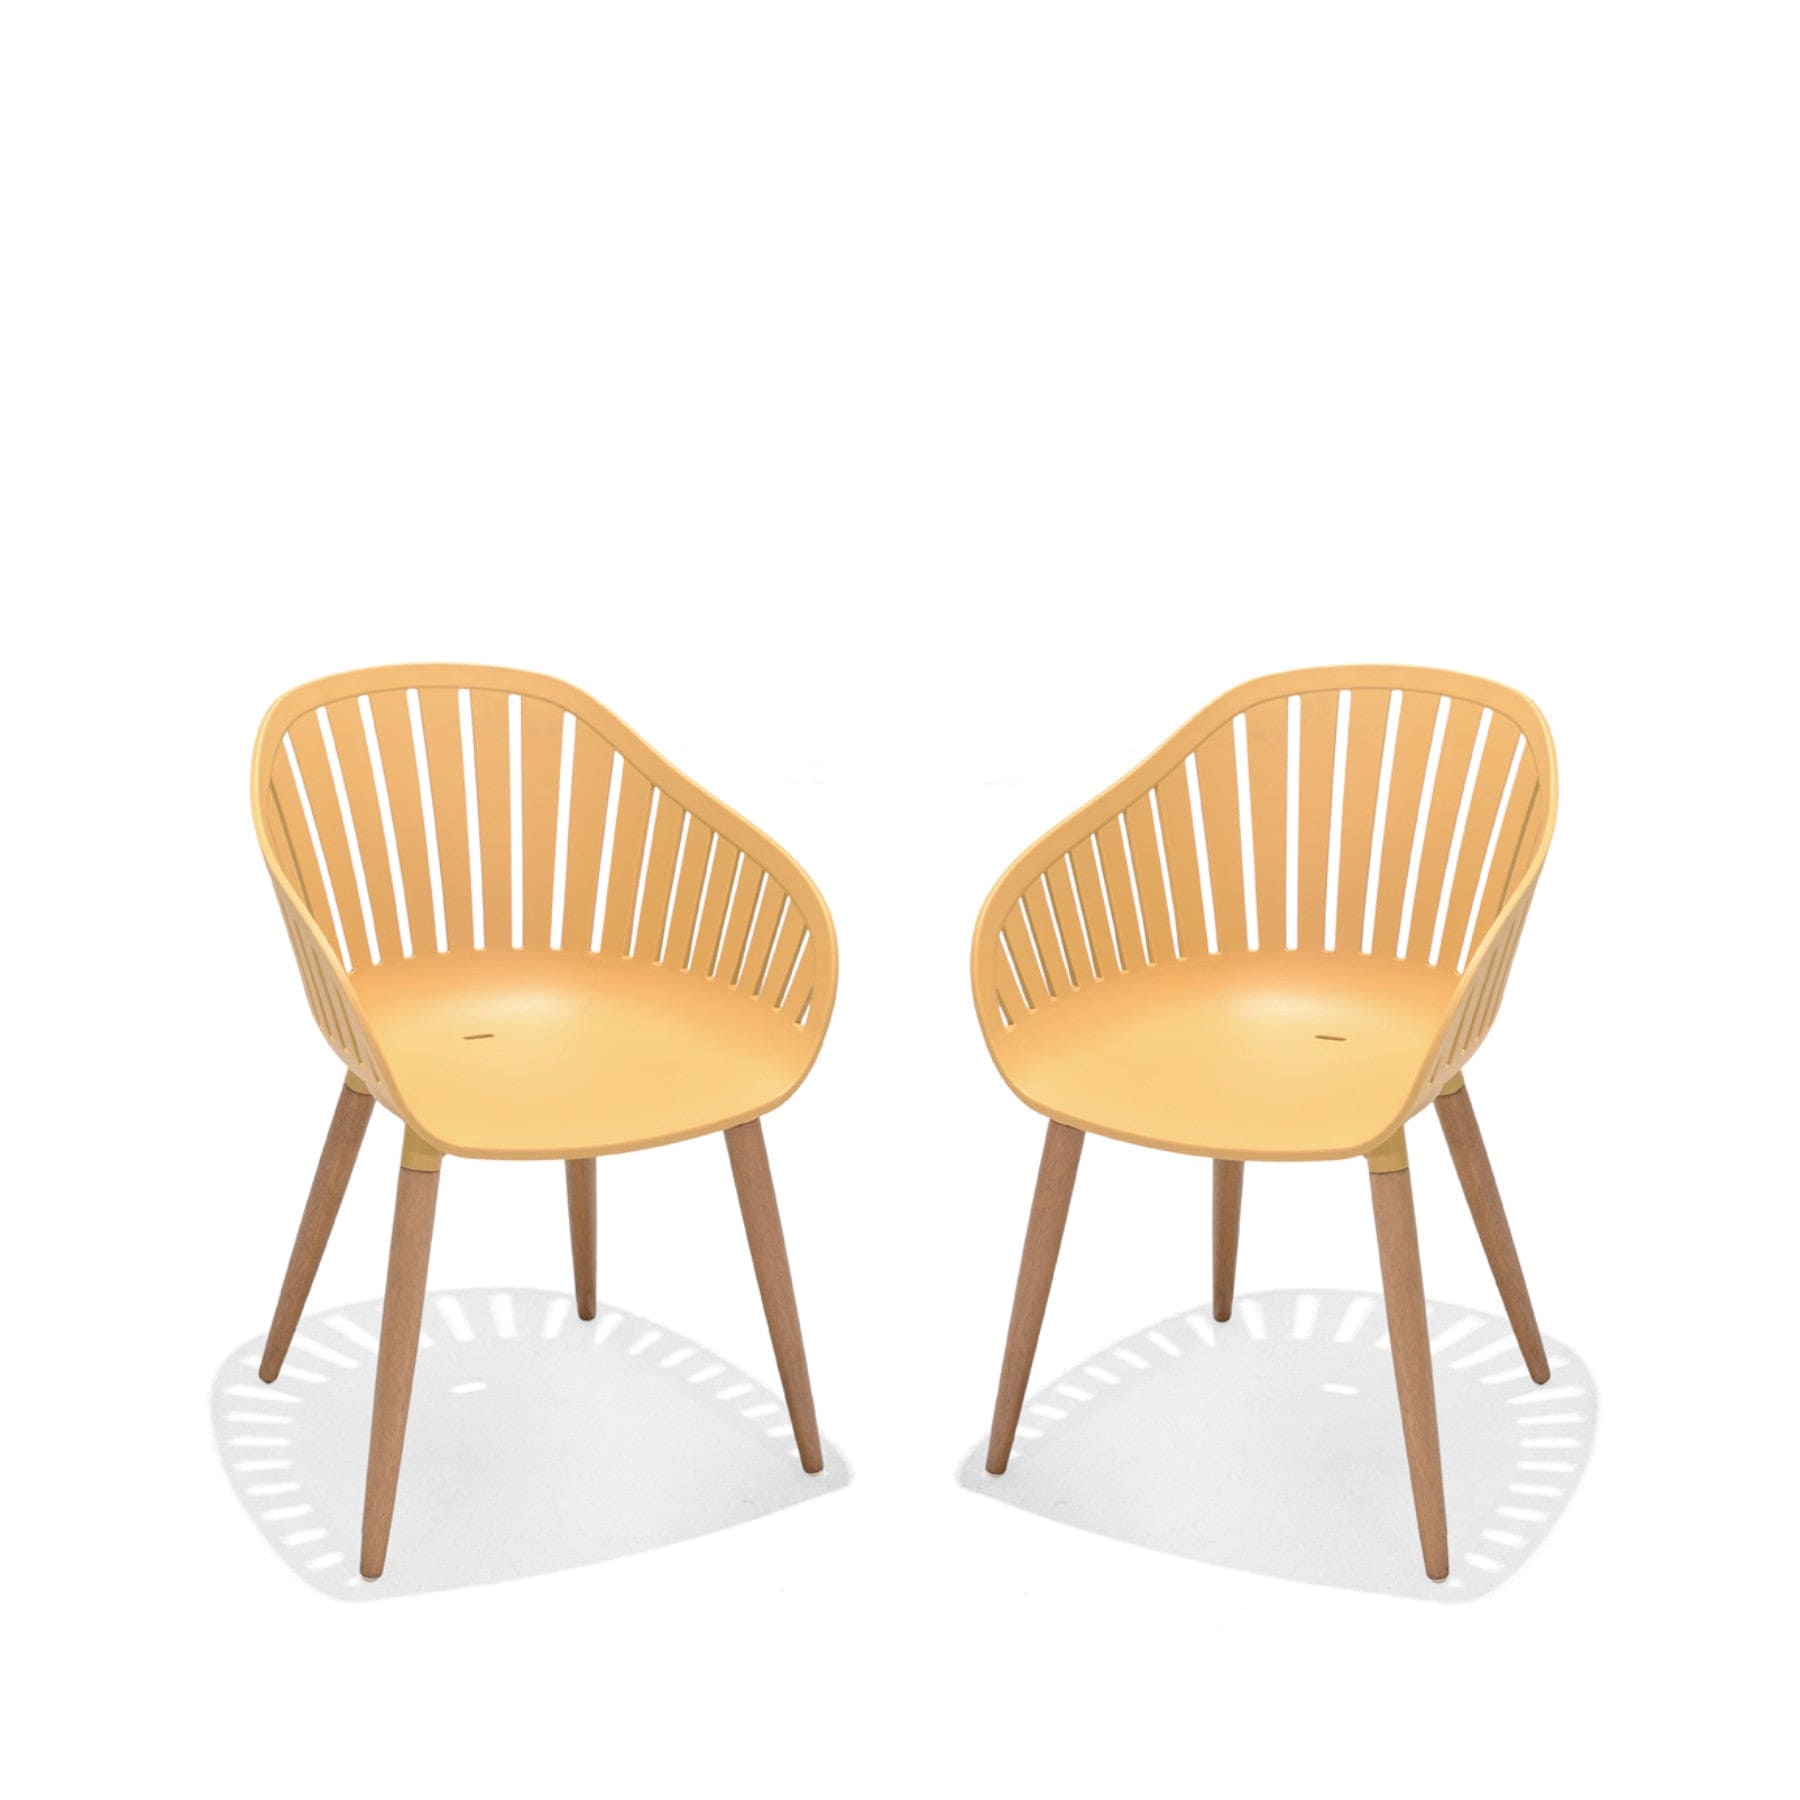 Two modern mustard yellow dining chairs with wooden legs and slatted backrest on white background